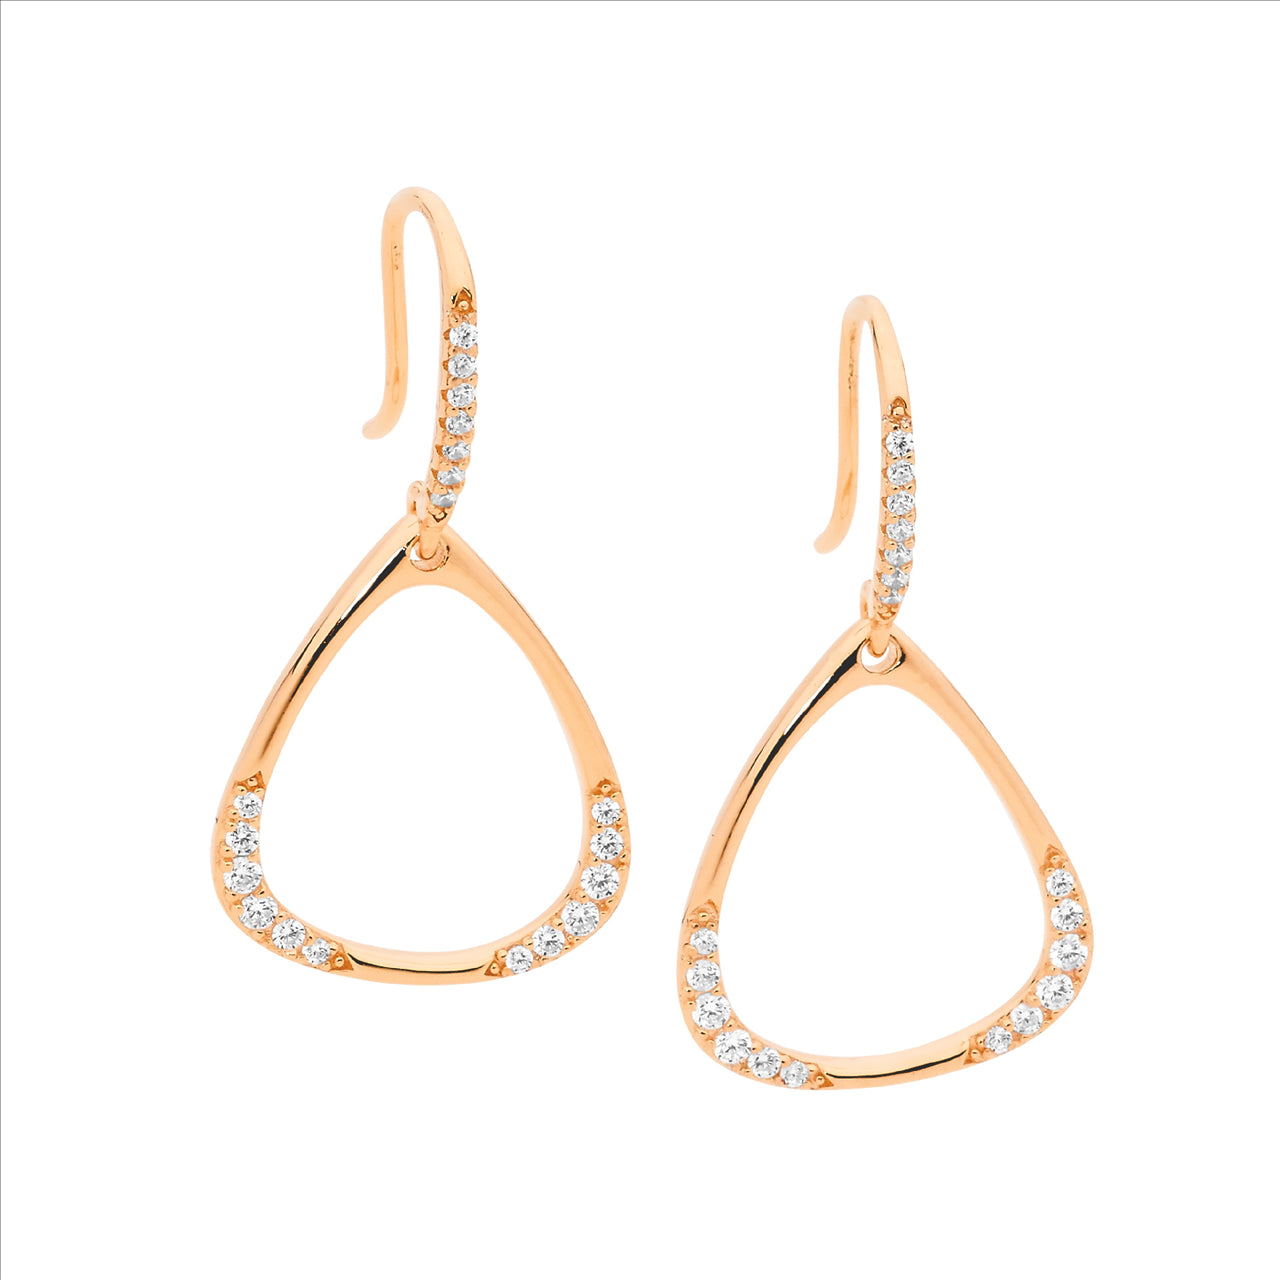 Open Traingle Drop Earrings with Cubic Zirconia bling- Rose Gold Plate.